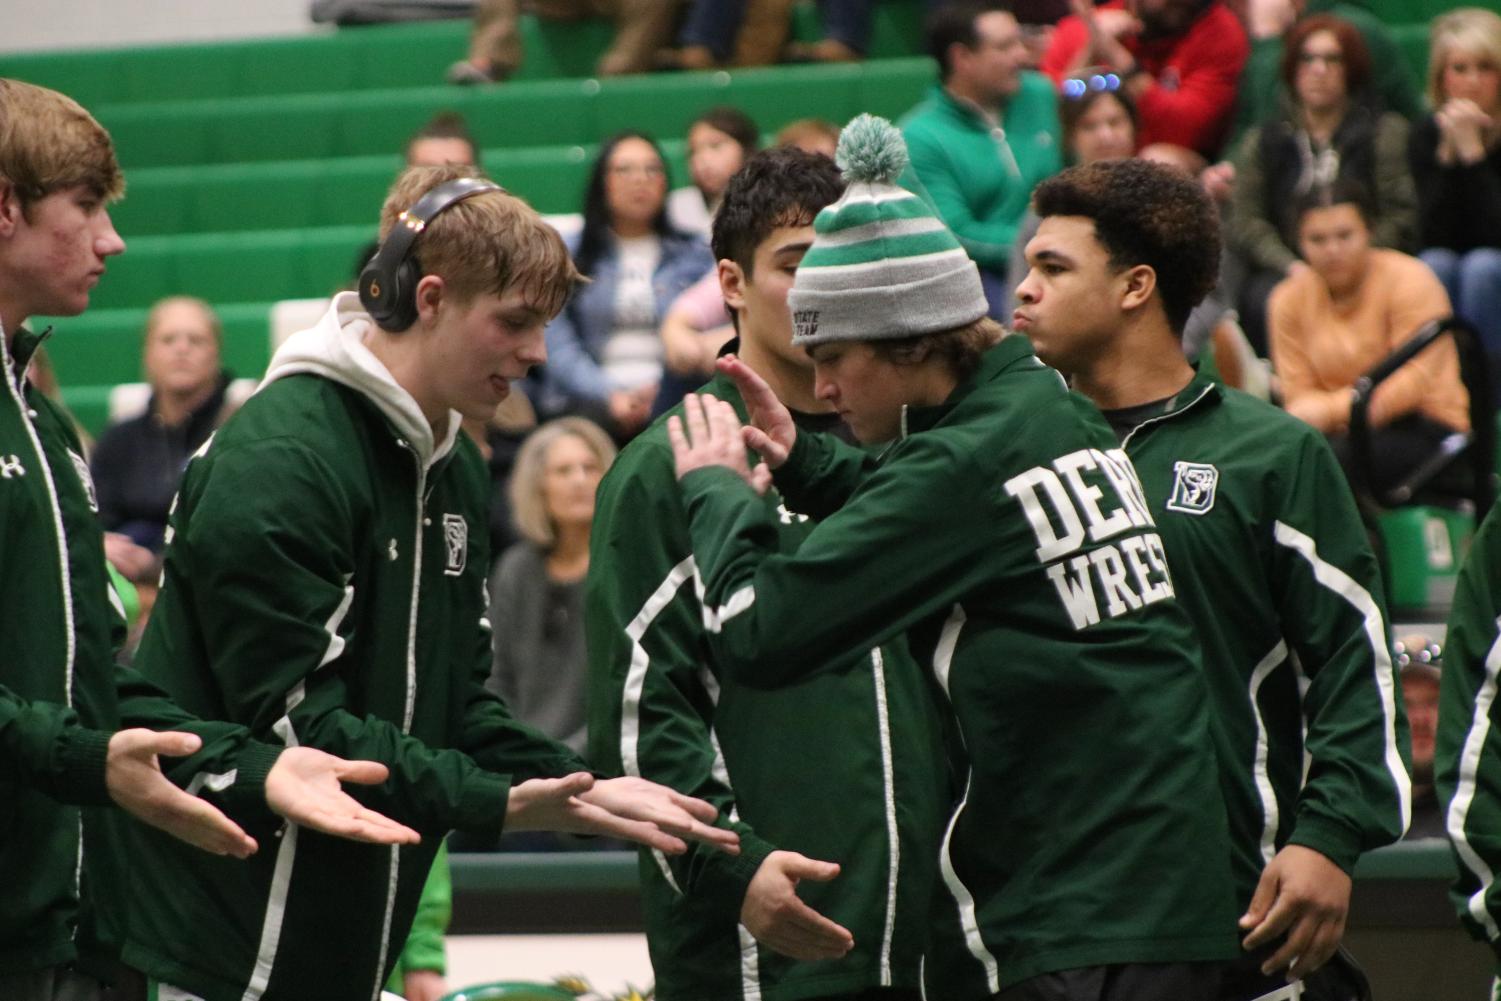 Wrestling+vs+Maize+%28Photos+by+Kaidence+Williams%29